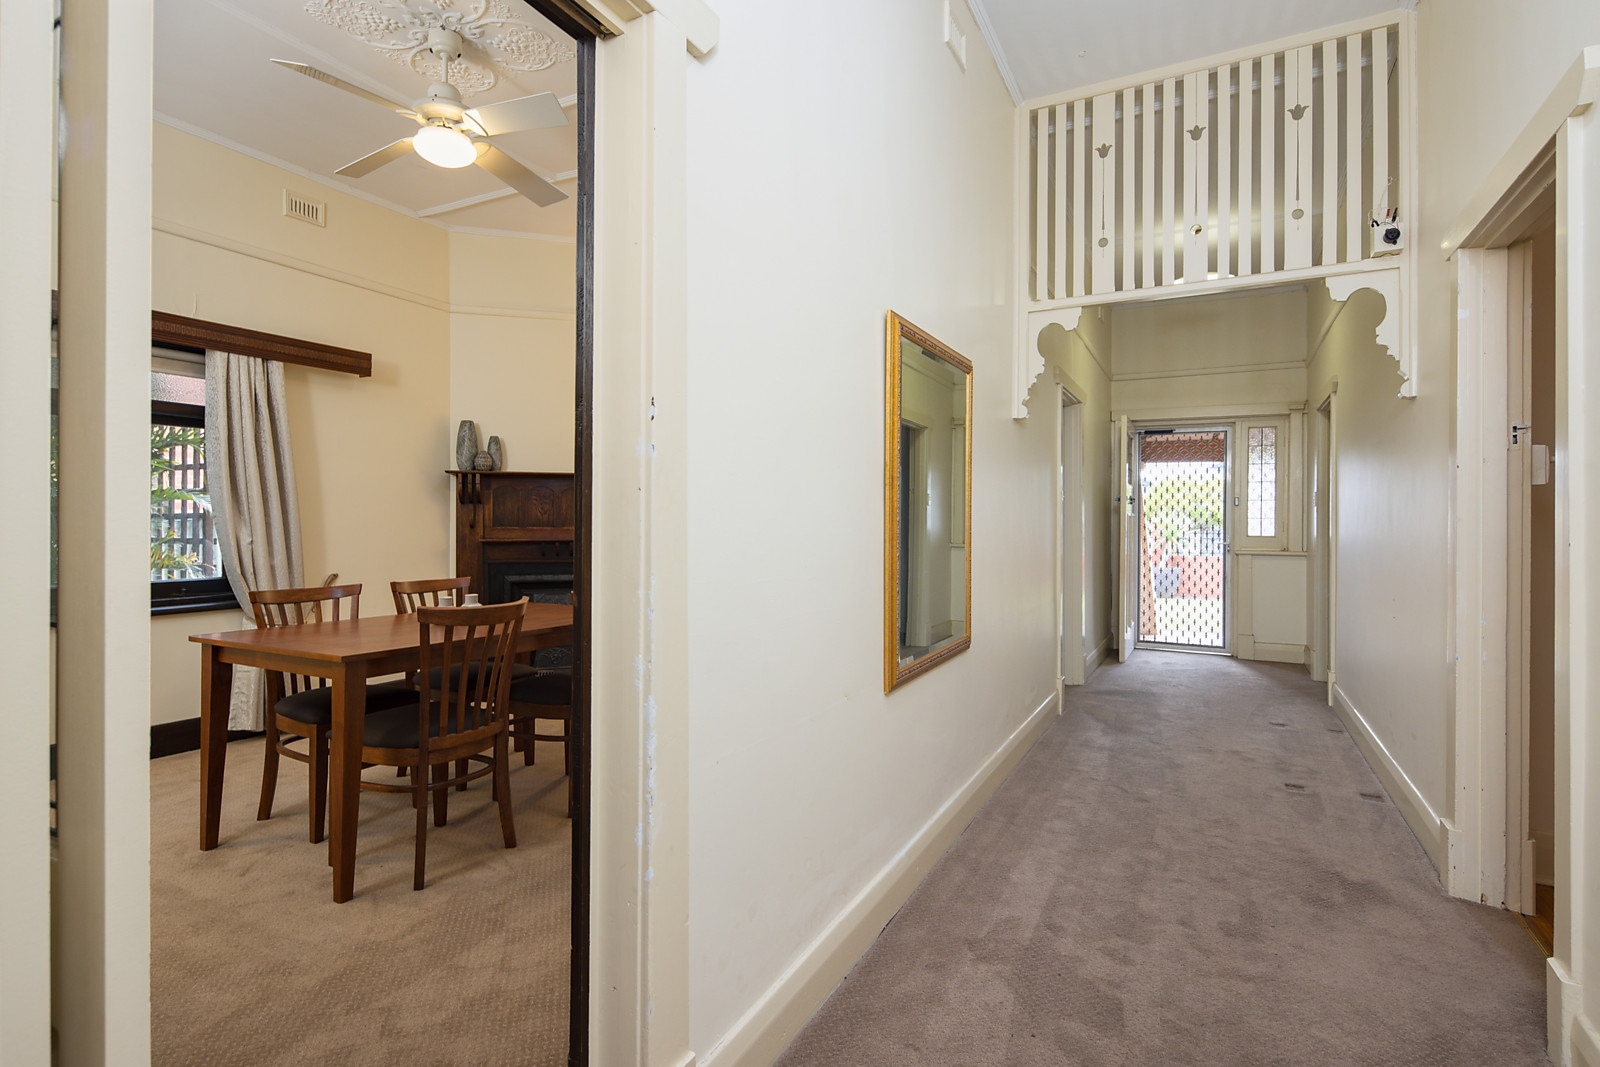 73 Balfour Street, Nailsworth Sold by Booth Real Estate - image 1